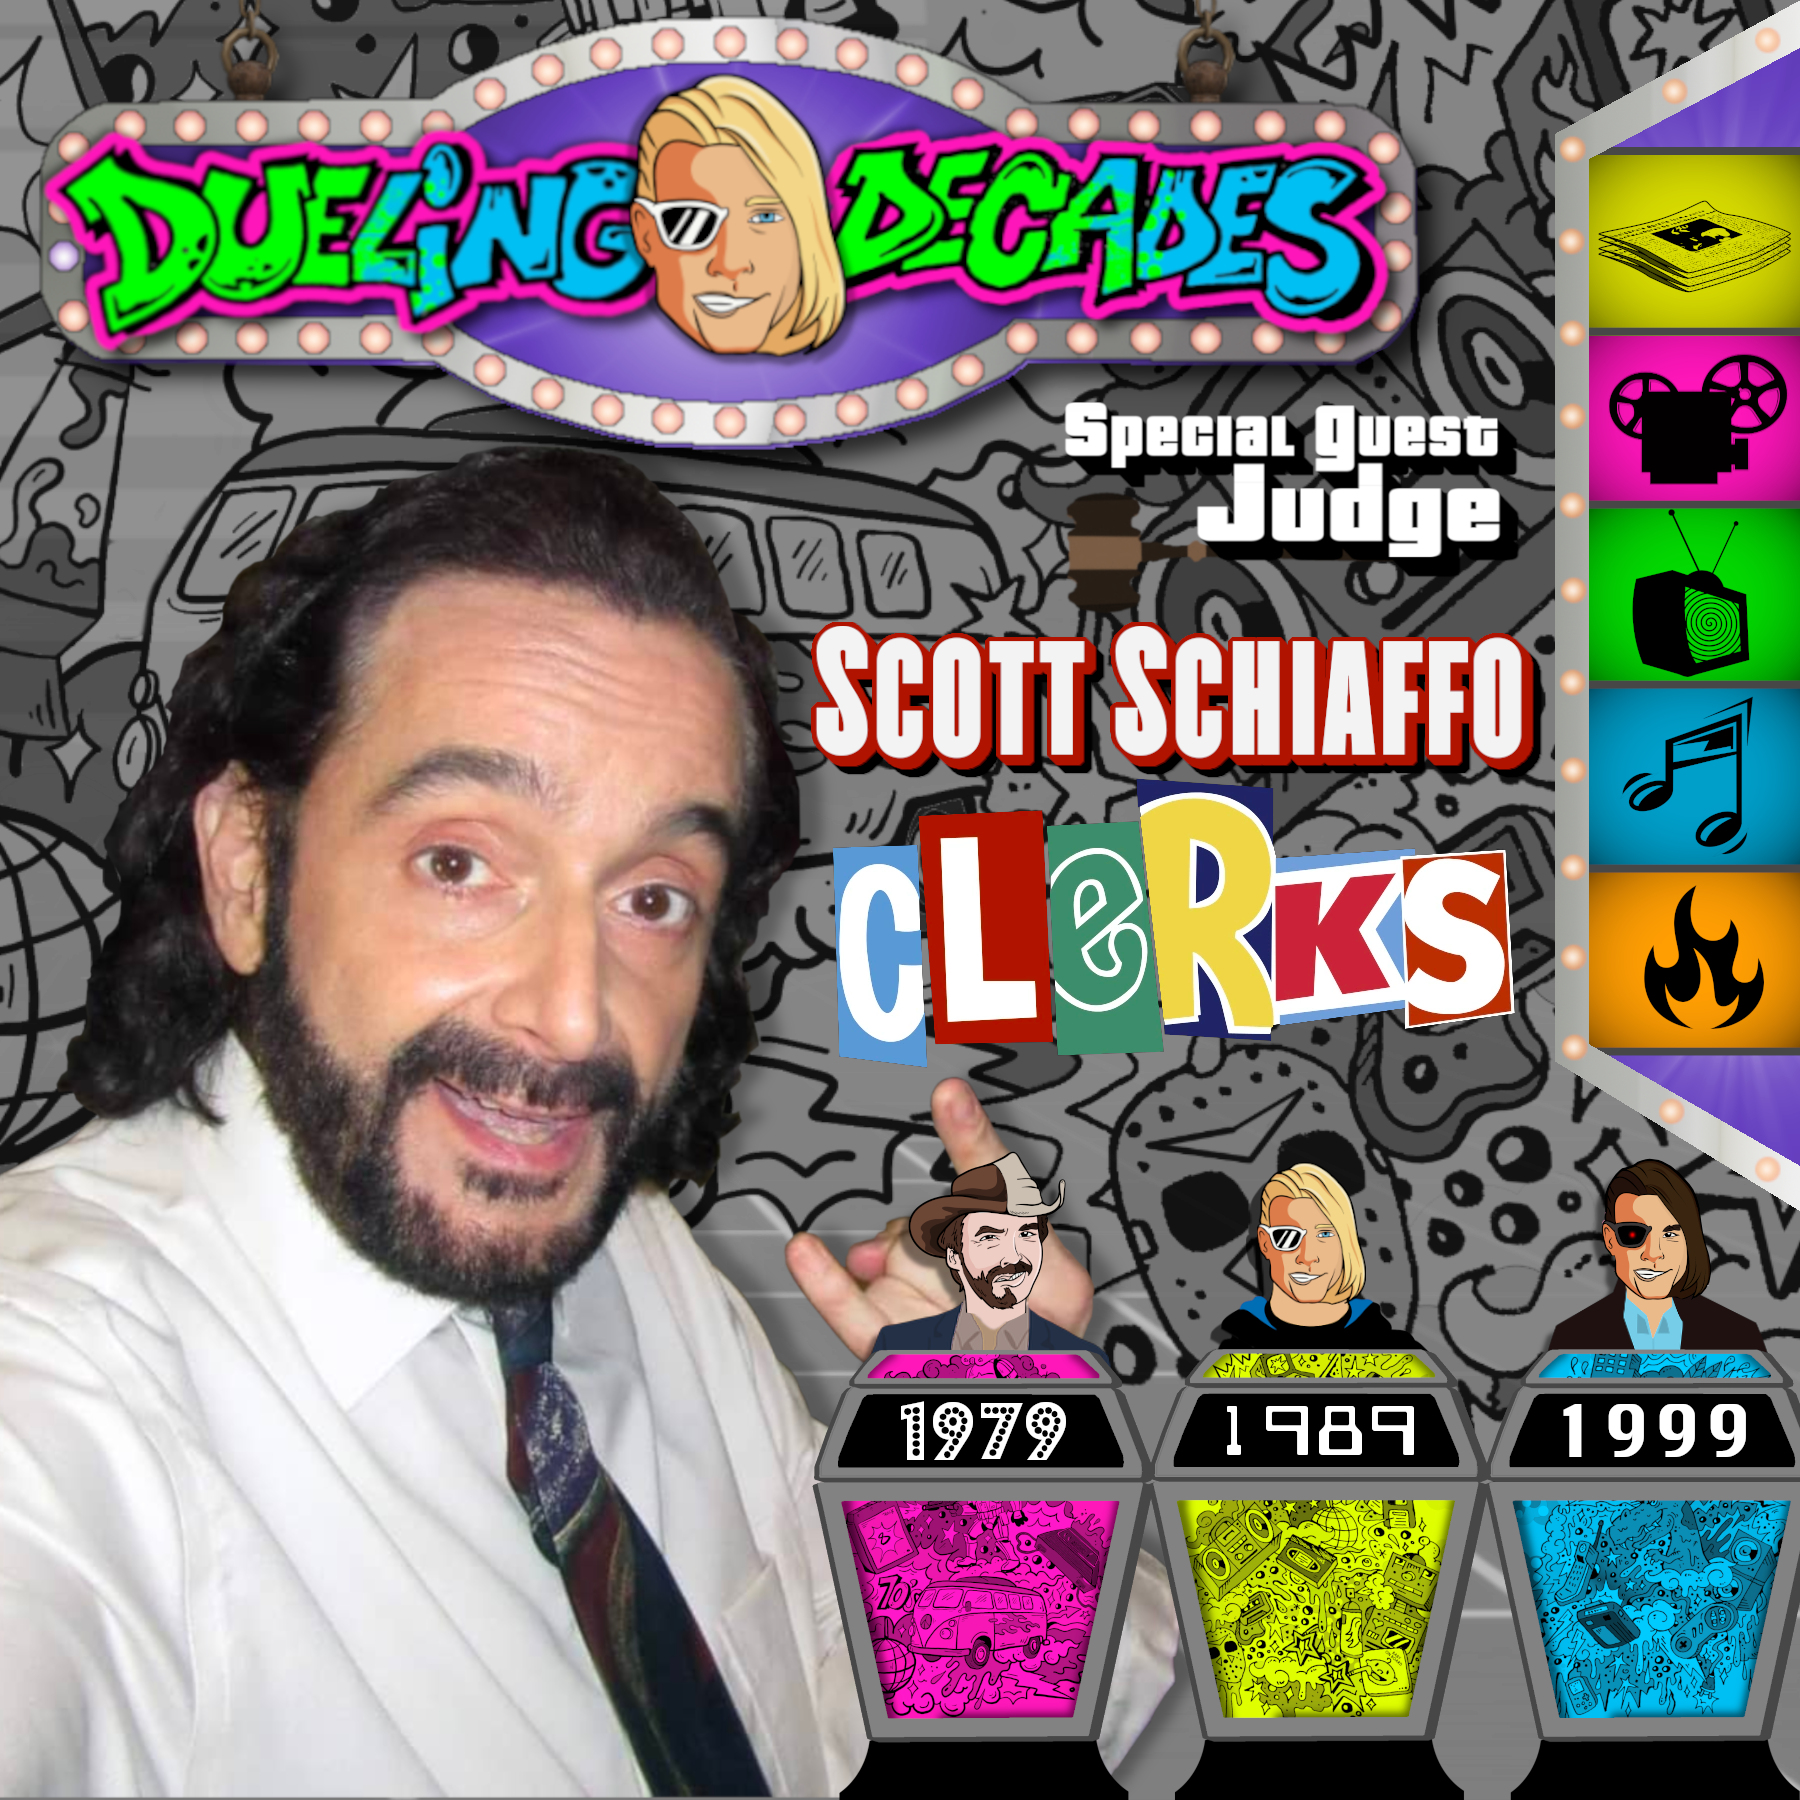 Clerks actor and Chewlies Gum Guy Scott Schiaffo judges who had the best week in September 1979, 1989 or 1999!